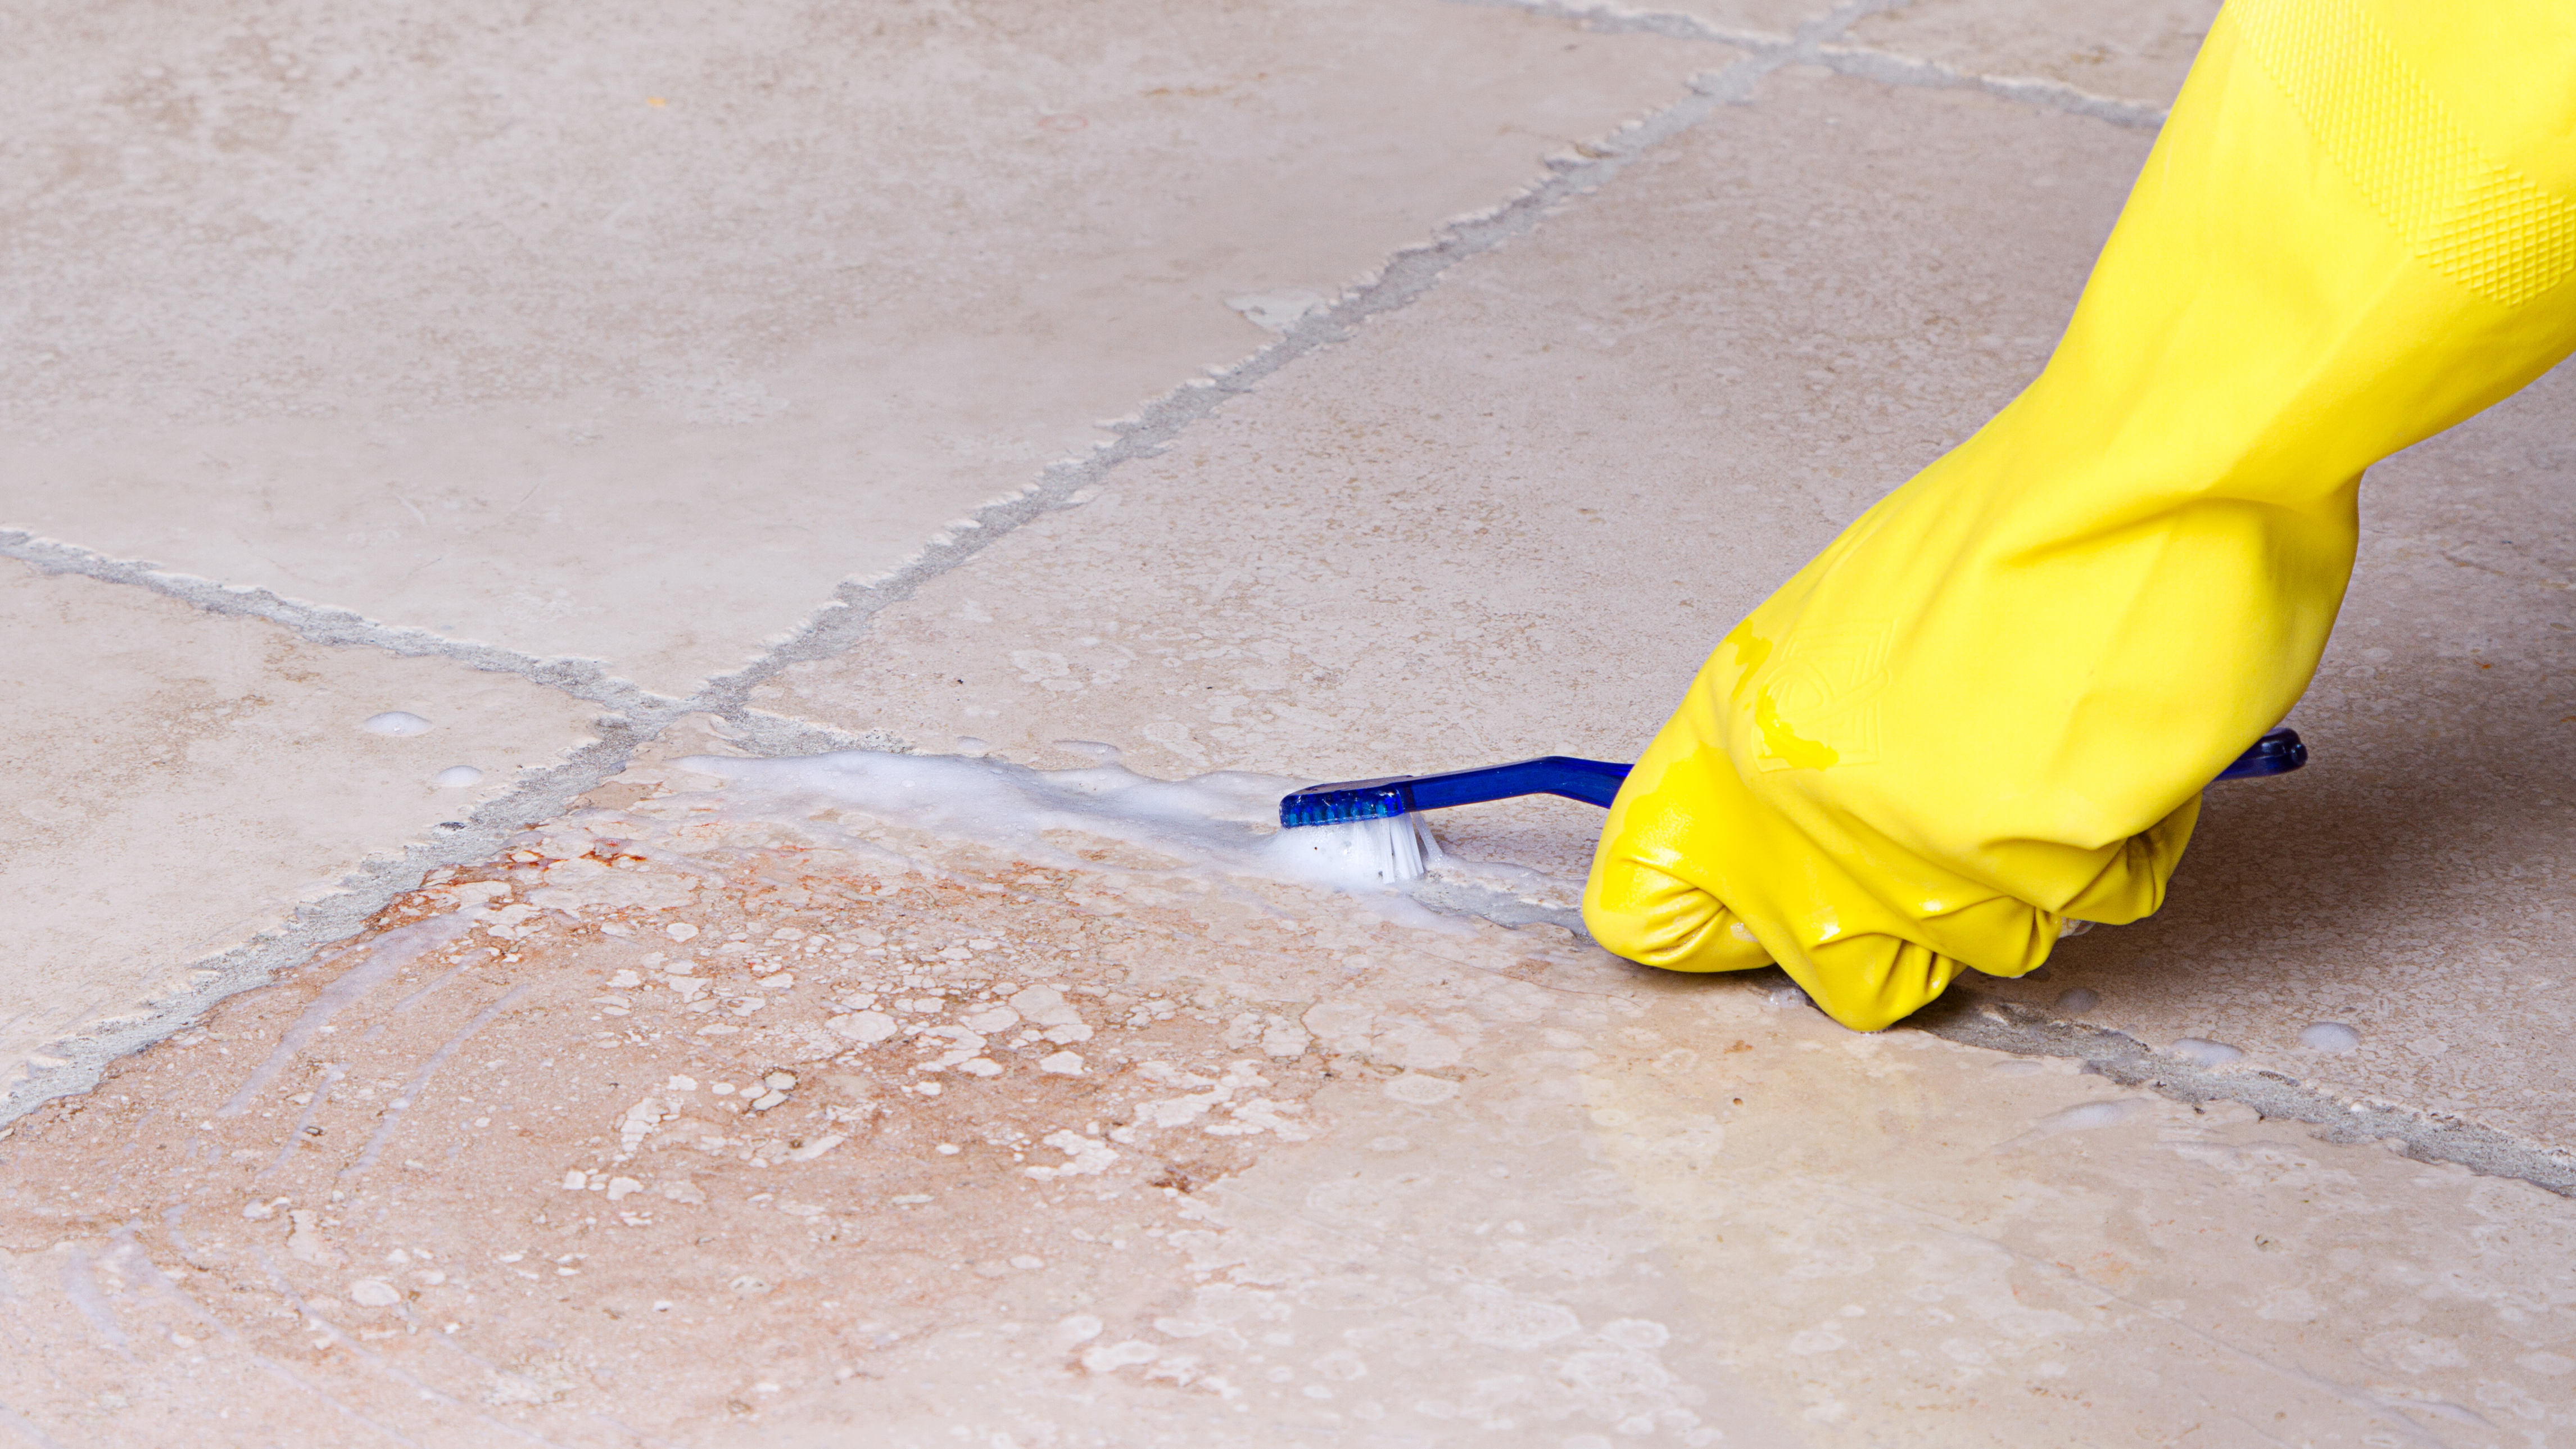 How To Clean Grout On Floor Tiles, How To Clean Dirty Ceramic Tile And Grout